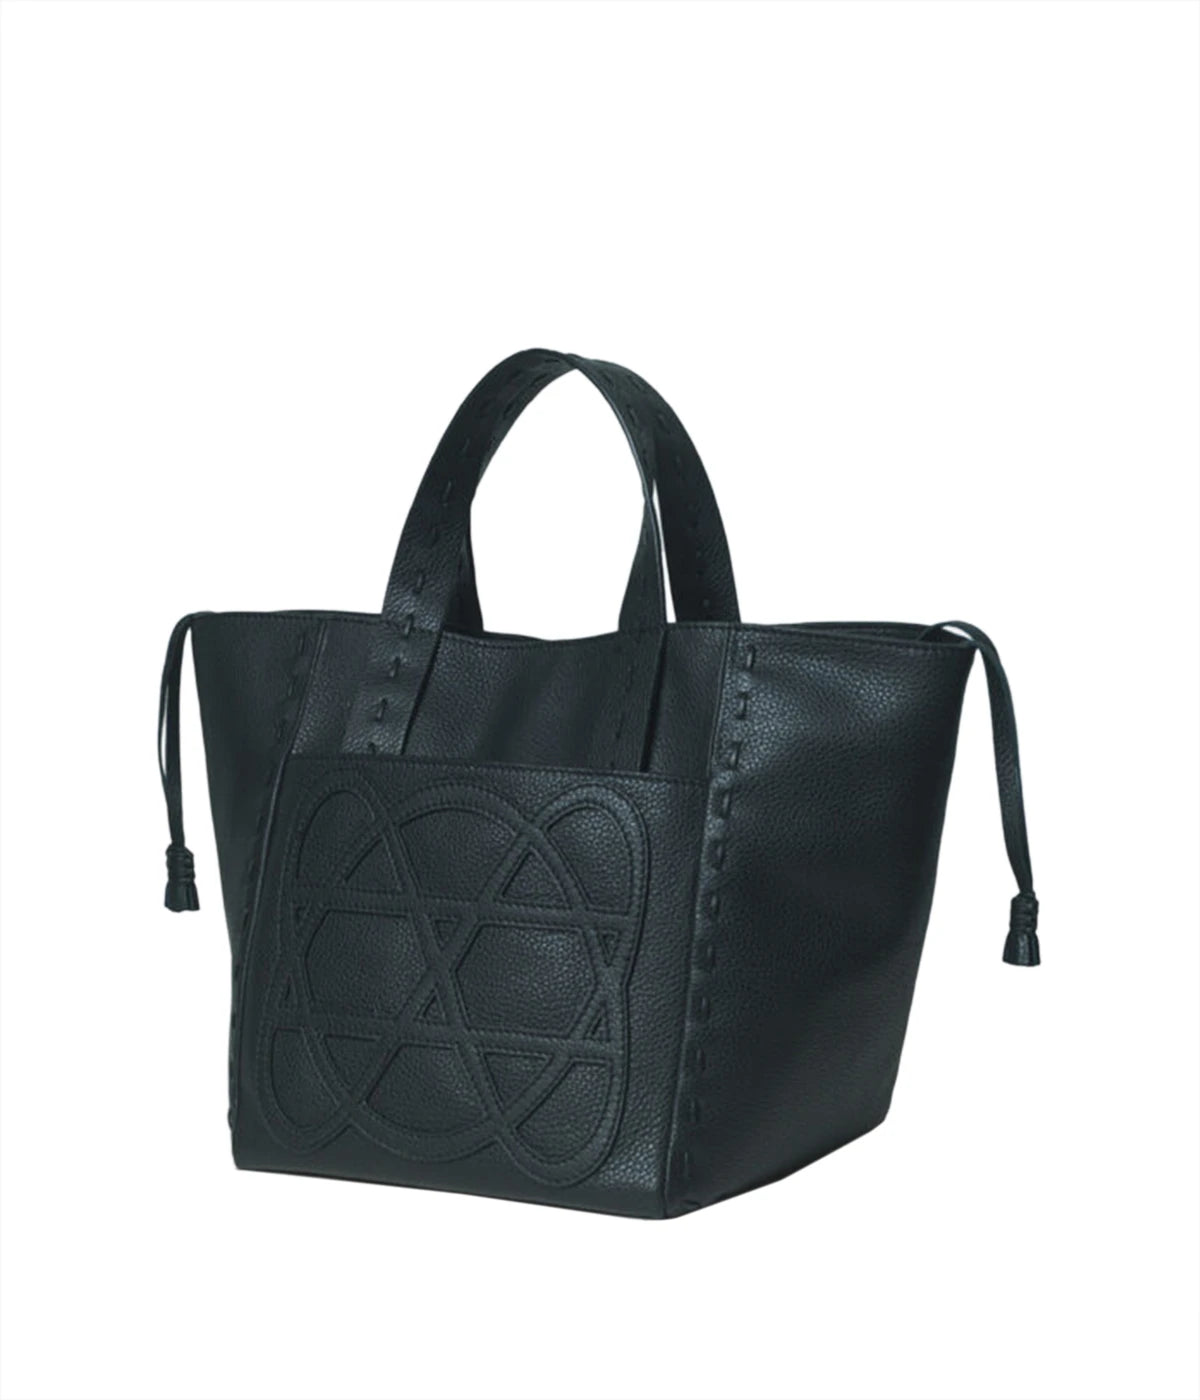 Cleo Grained Leather Bag in Black